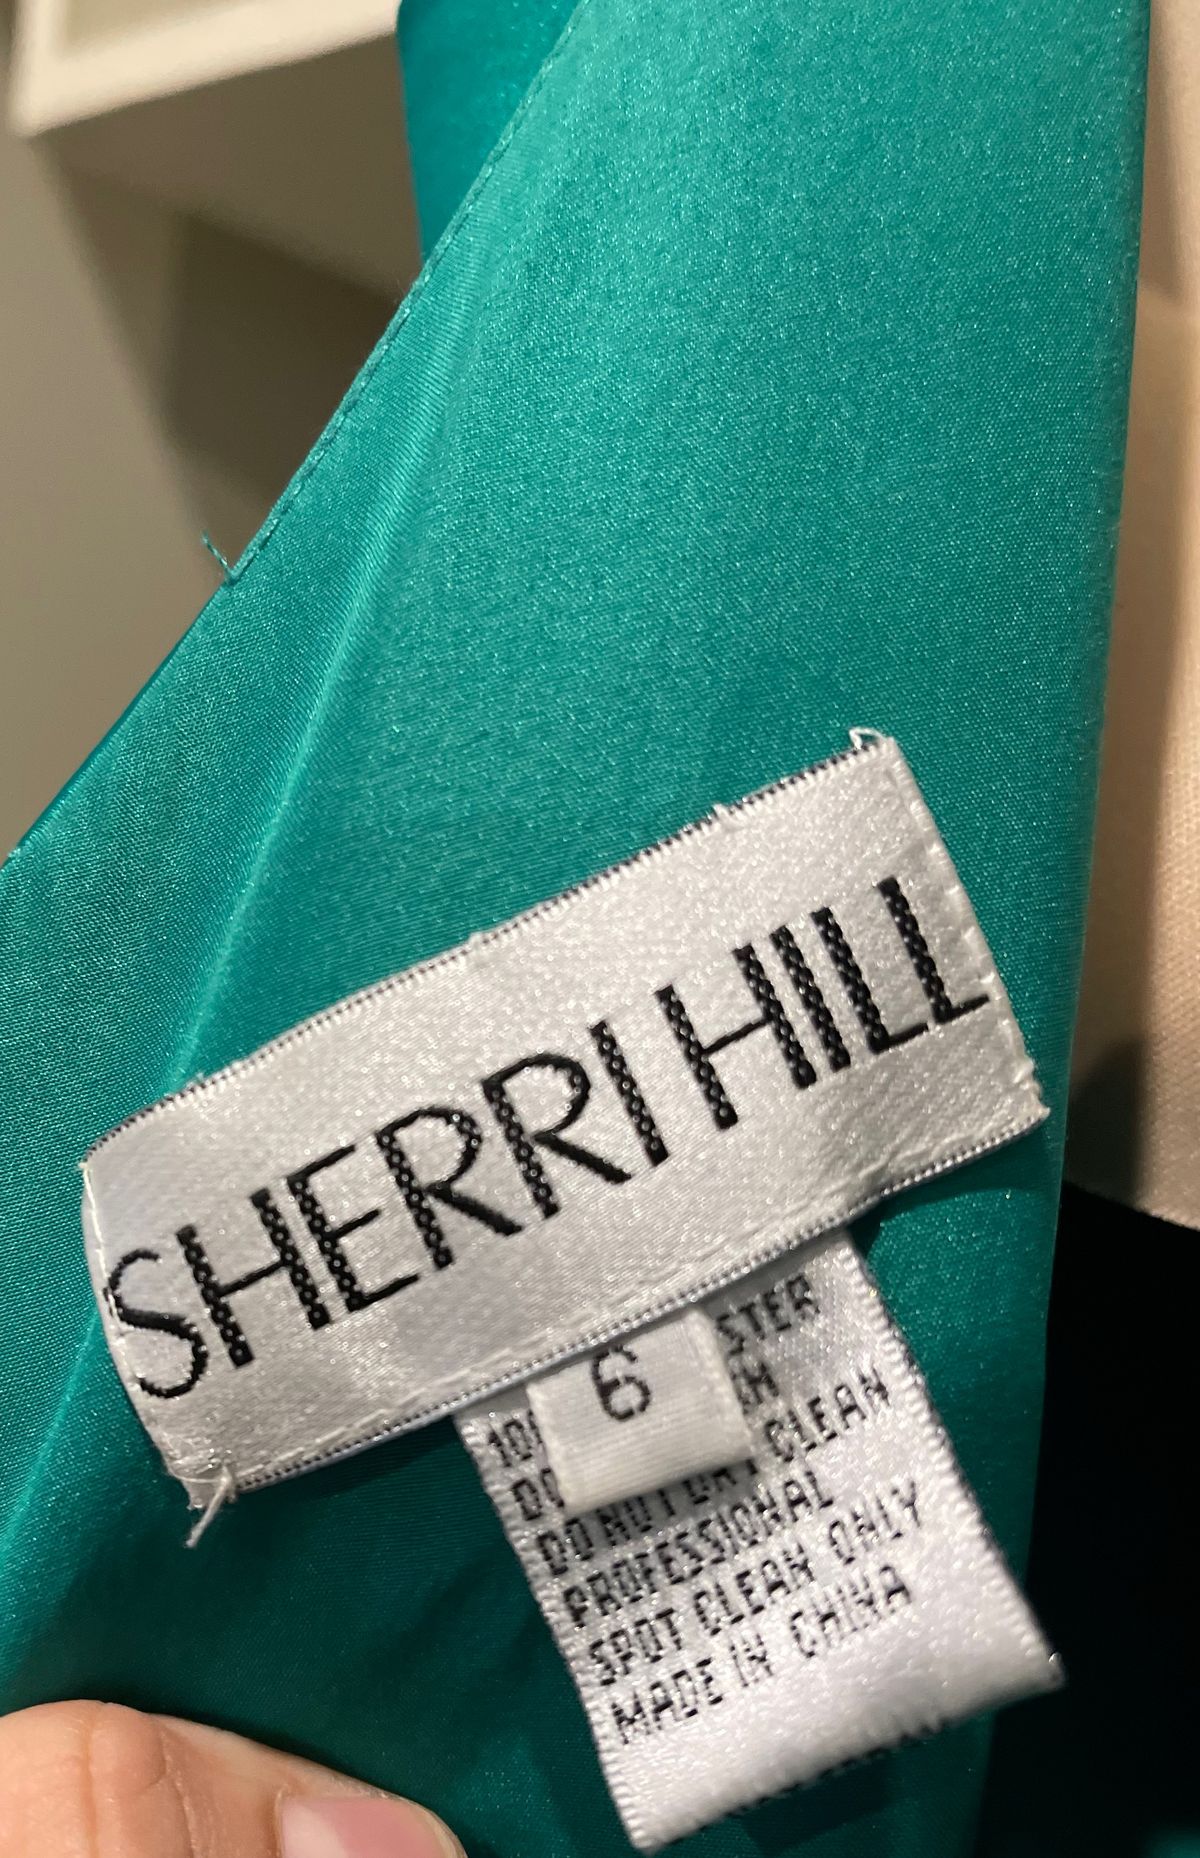 Sherri Hill Size 6 Prom Sheer Emerald Green Ball Gown on Queenly